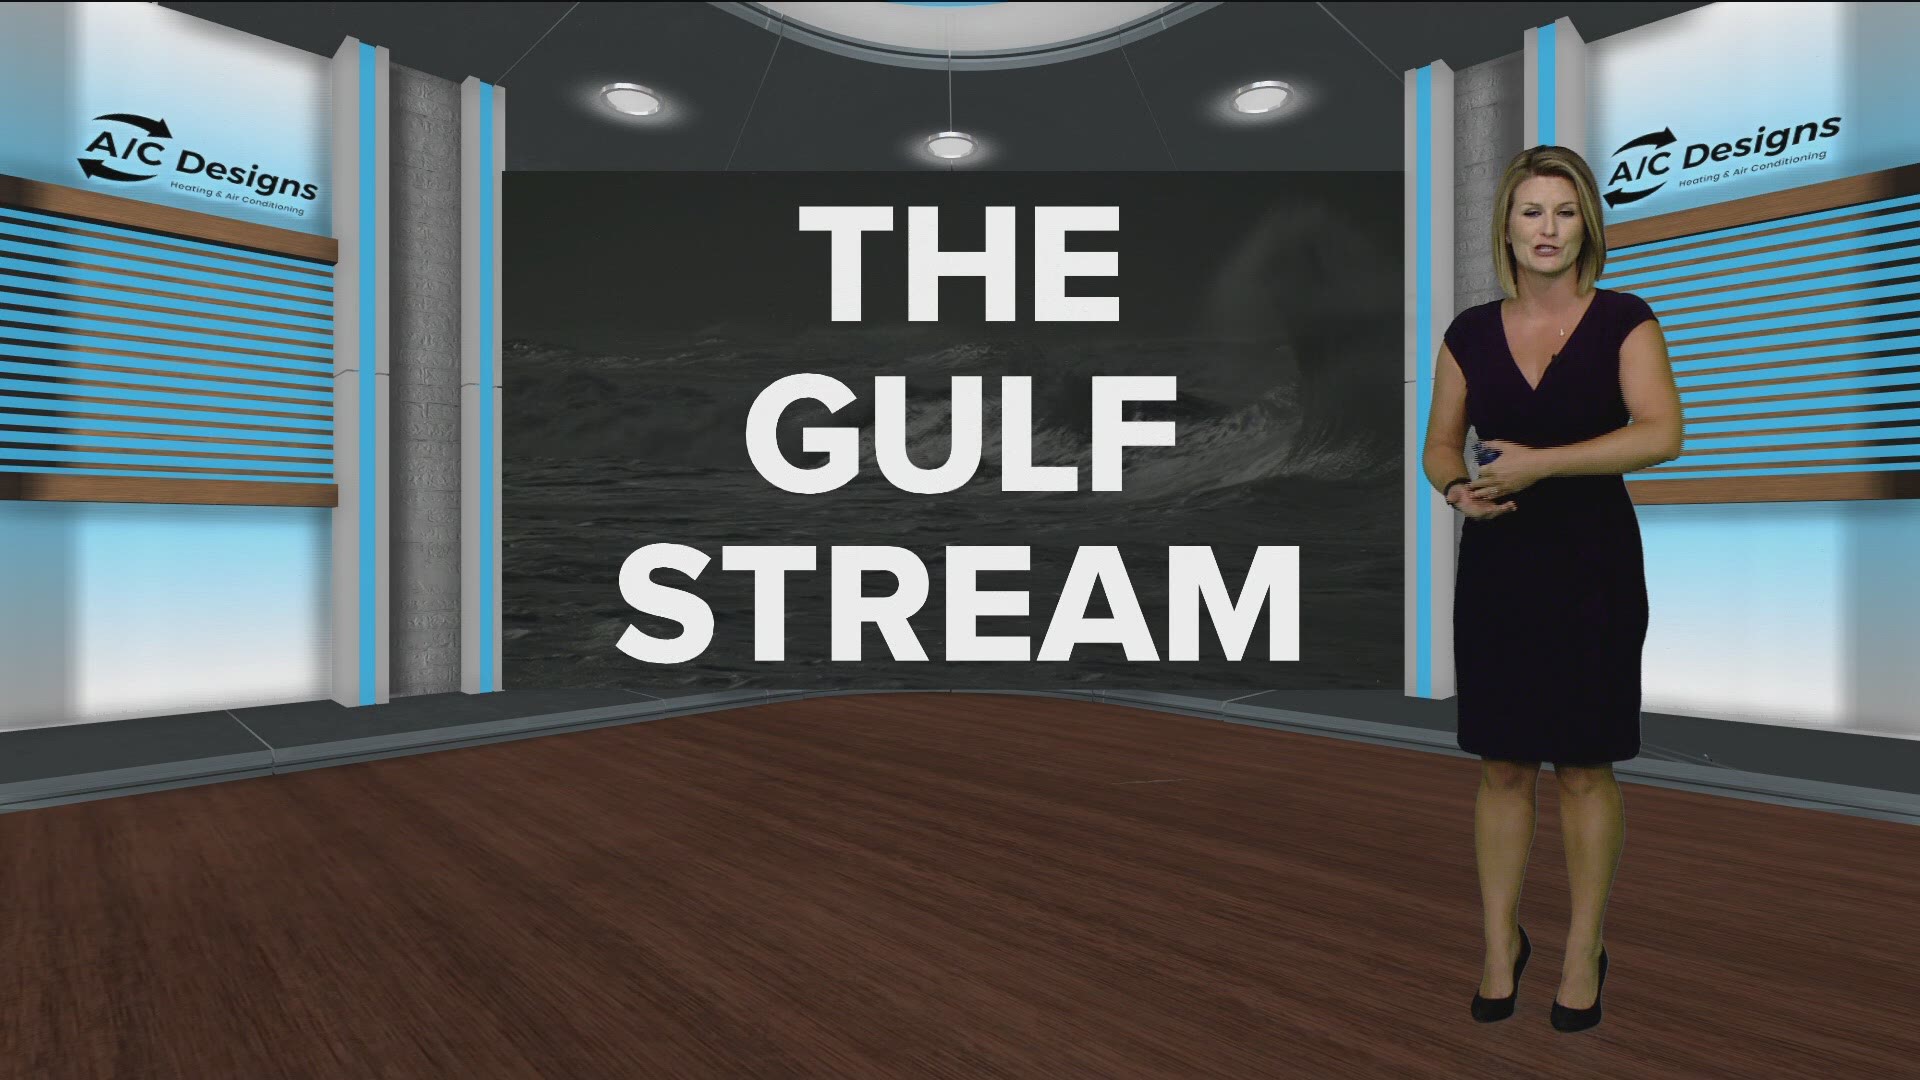 The Gulf Stream is a strong ocean current brings warm water from the Gulf of Mexico all the way up the eastern coast of the U.S. and Canada.